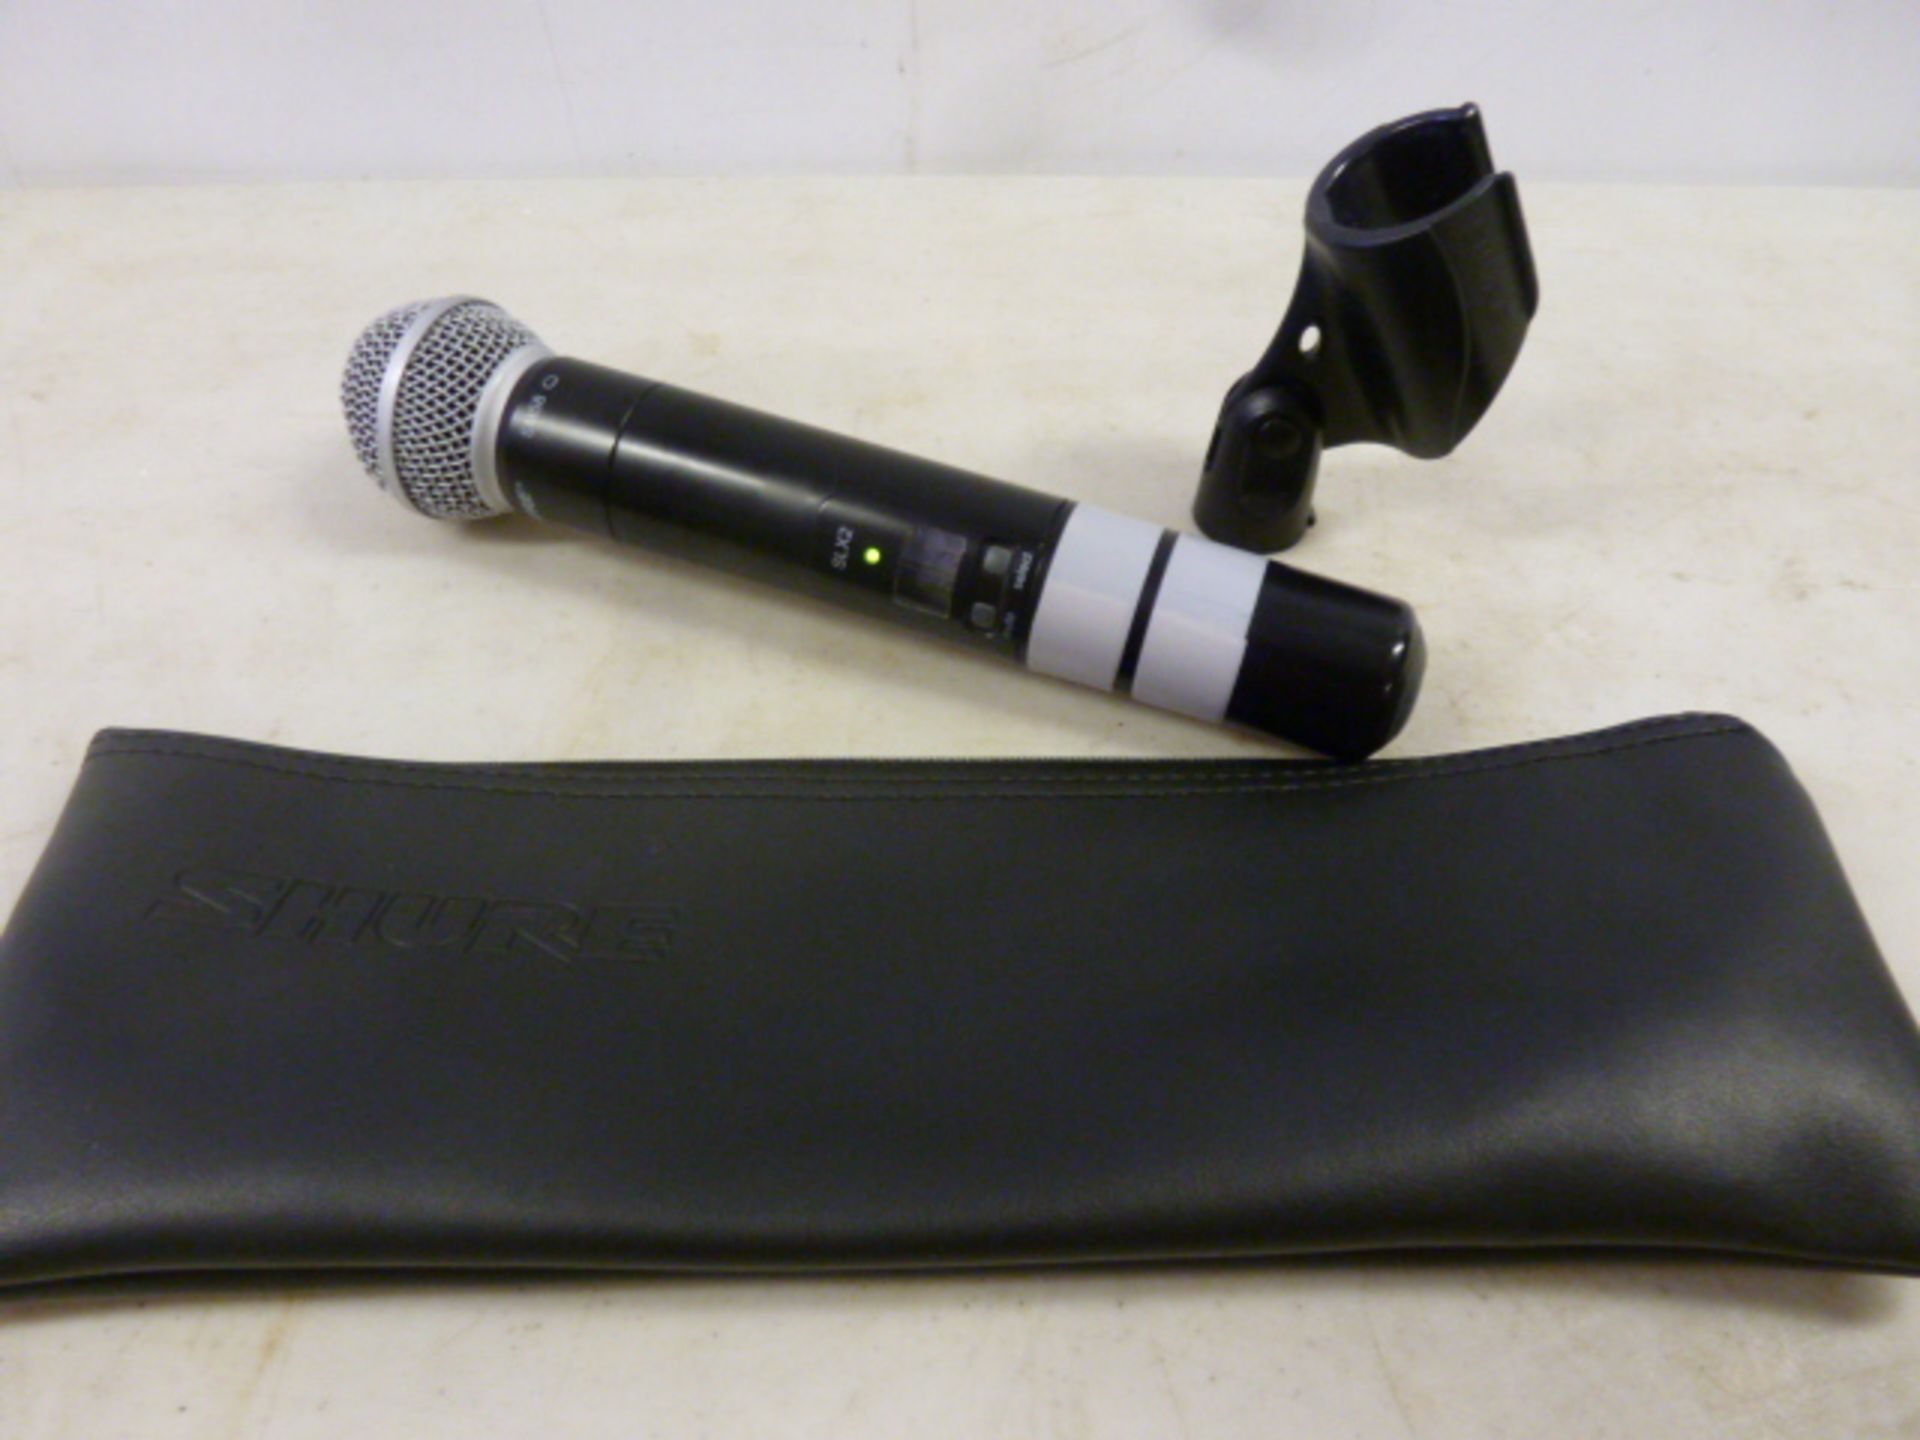 Shure SM58 Wireless Microphone In Black, Model SLX2. Comes with Black Pouch & Microphone Stand